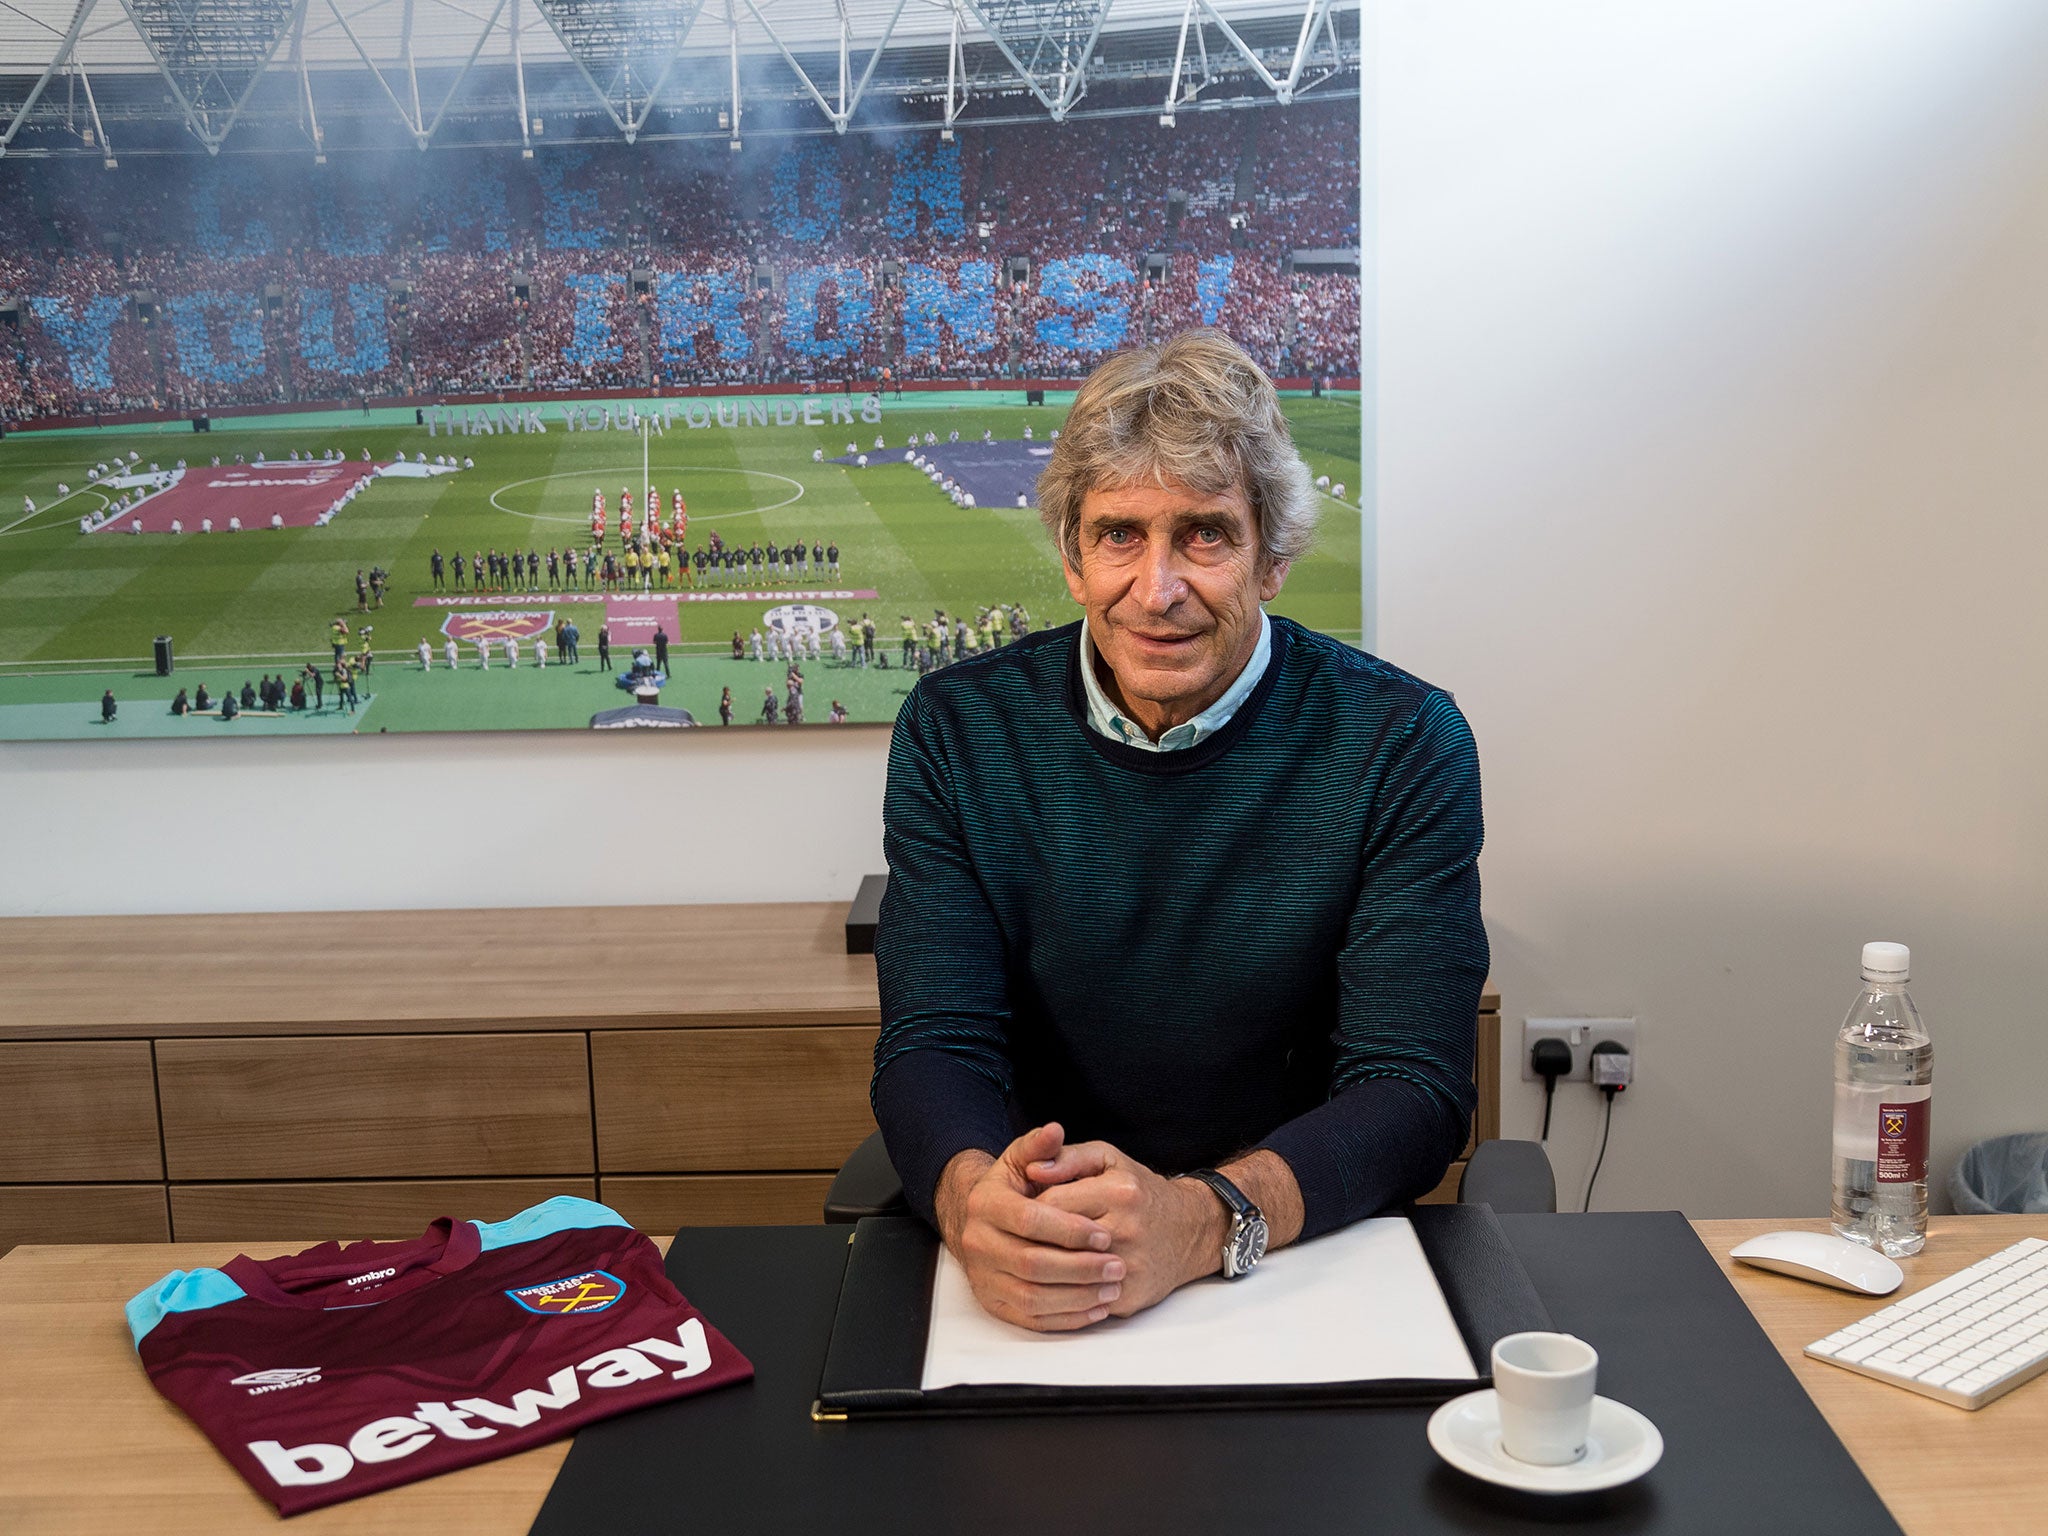 Manuel Pellegrini was confirmed as West Ham's new manager on Tuesday